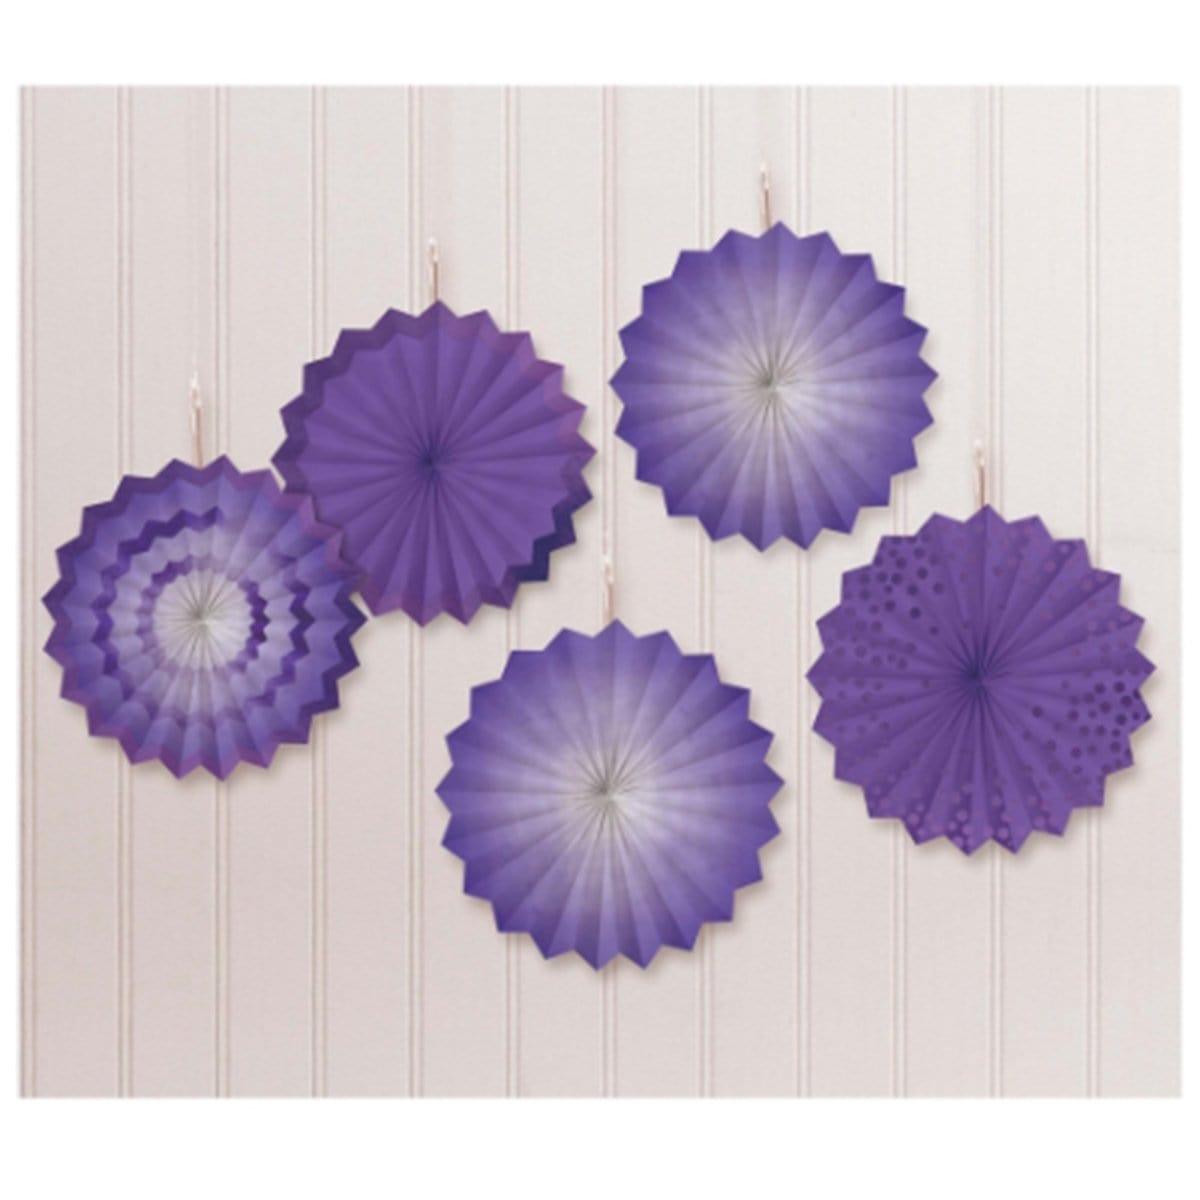 Buy Decorations Mini Fan Decoration 5 Per Package - New Purple sold at Party Expert